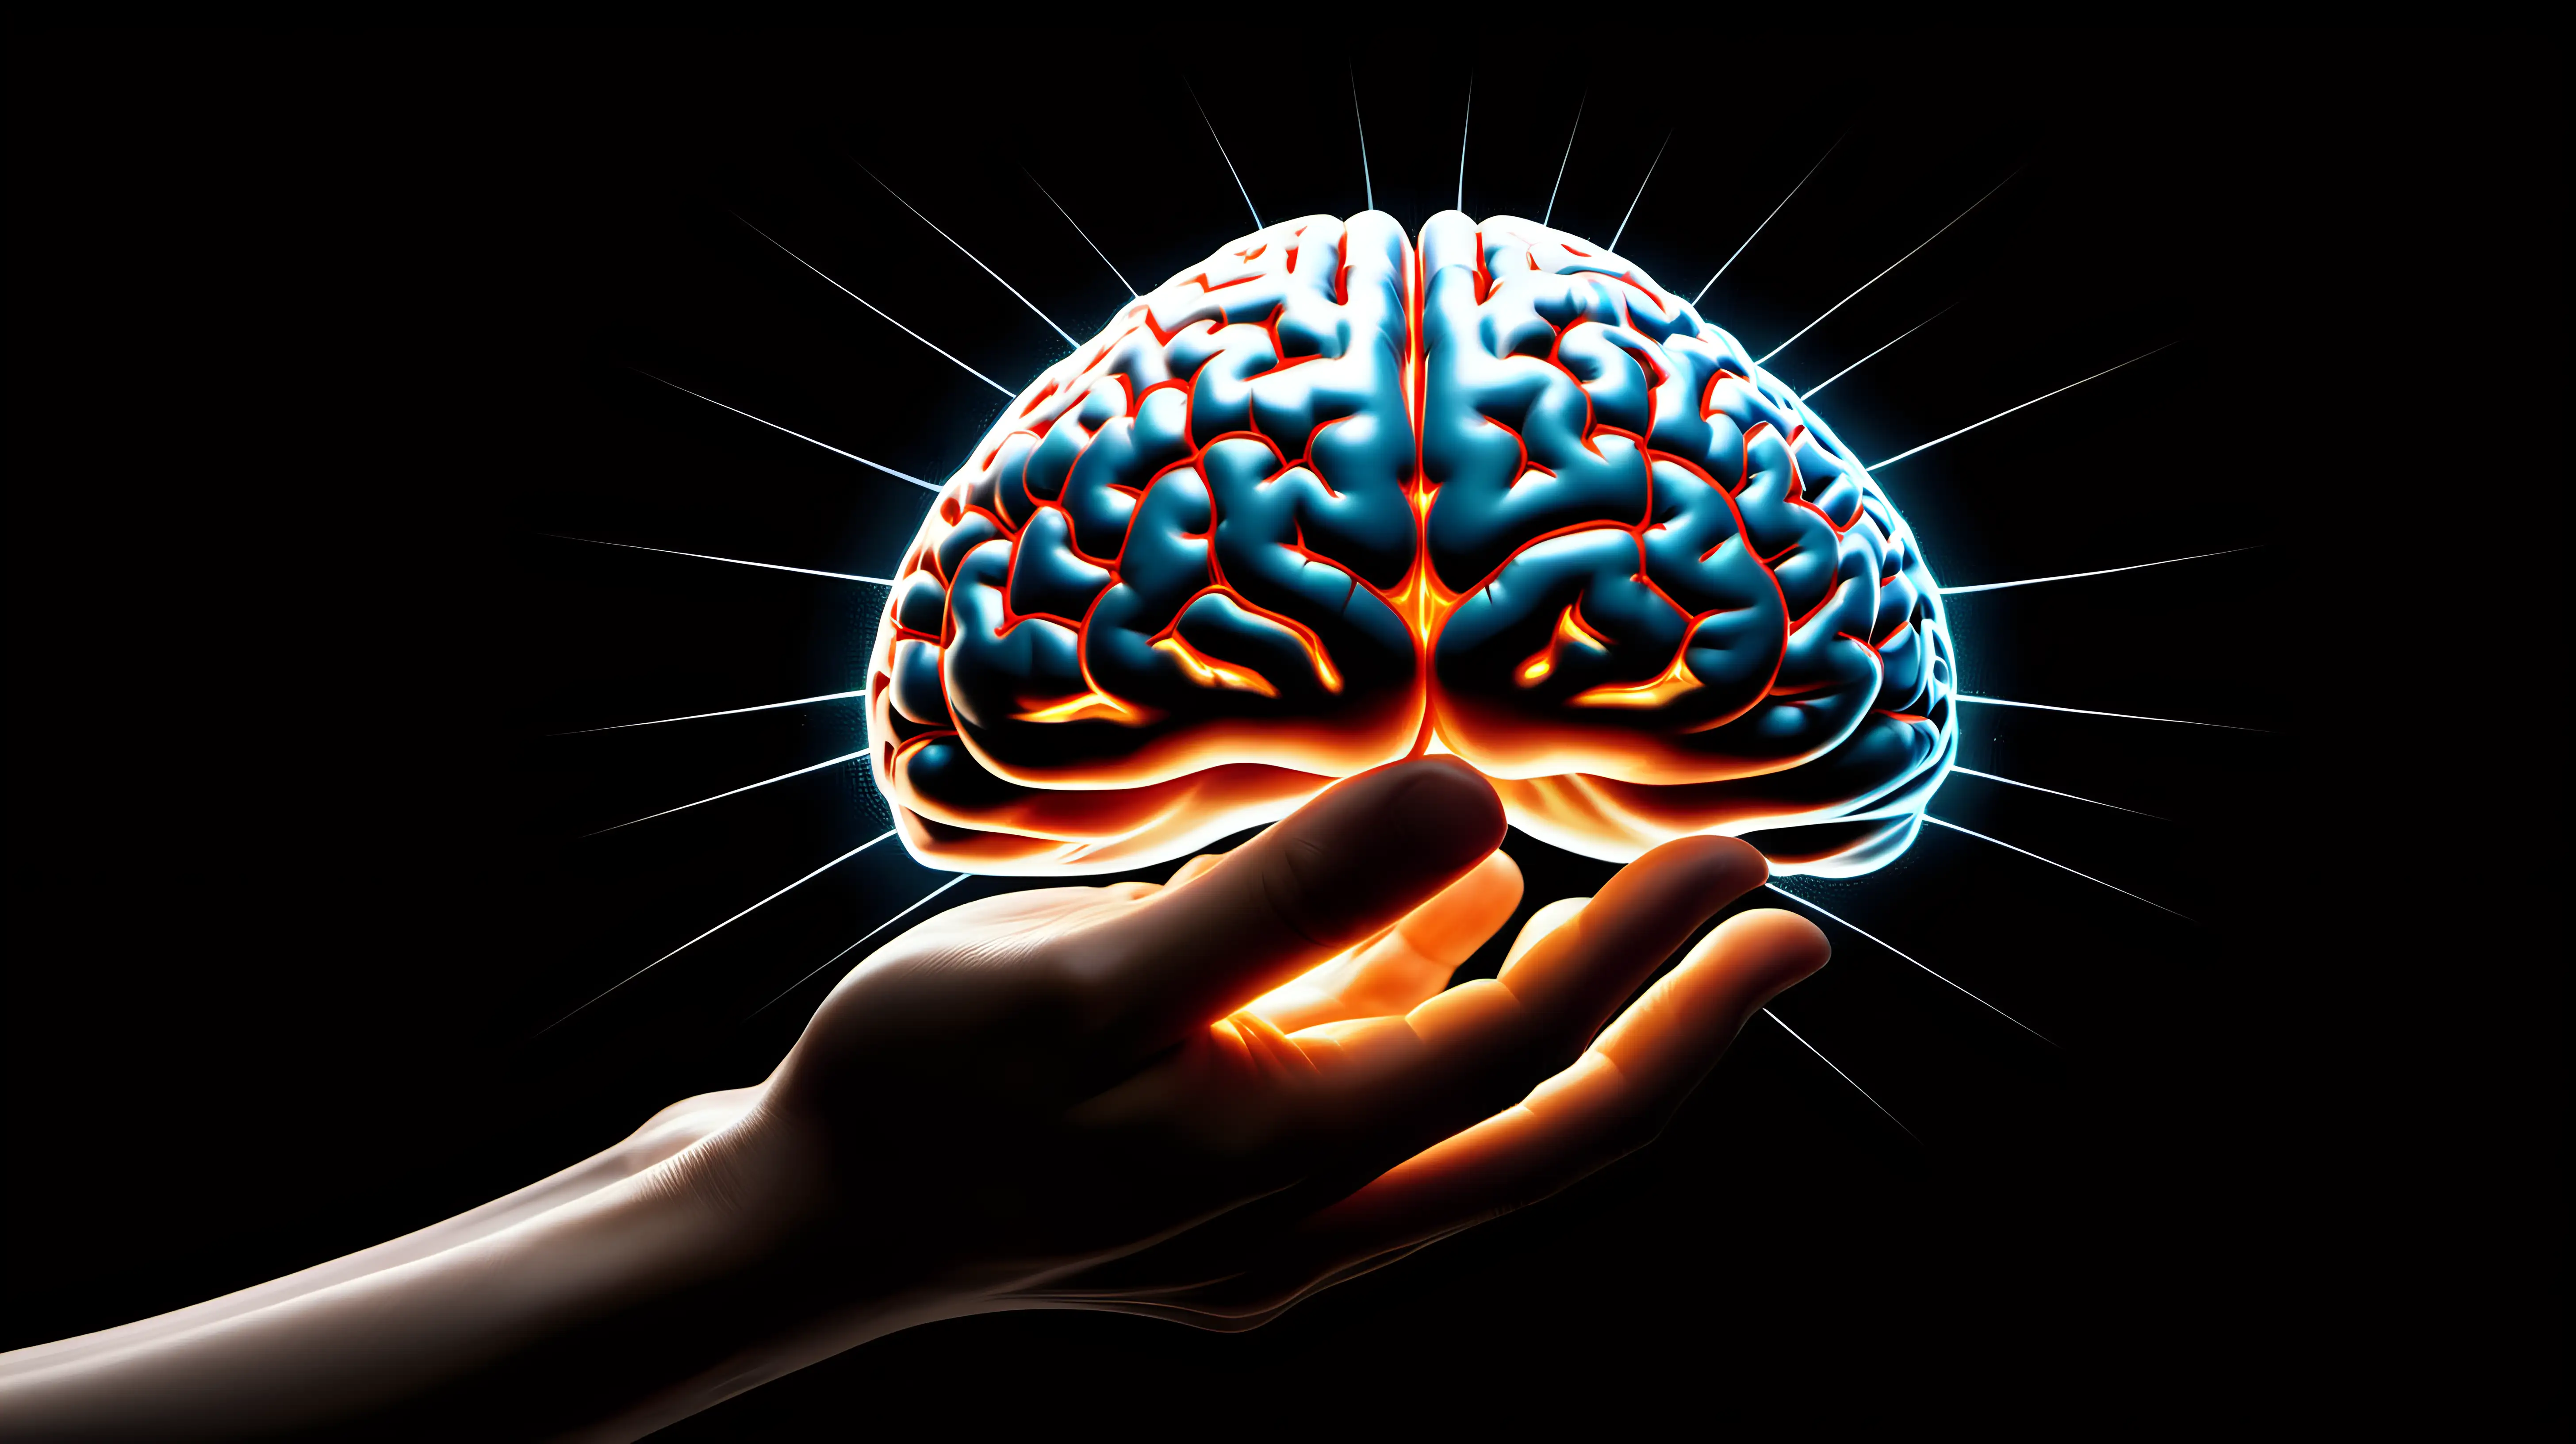 Hands Holding Radiant Brain Connection and Care for Brain Health